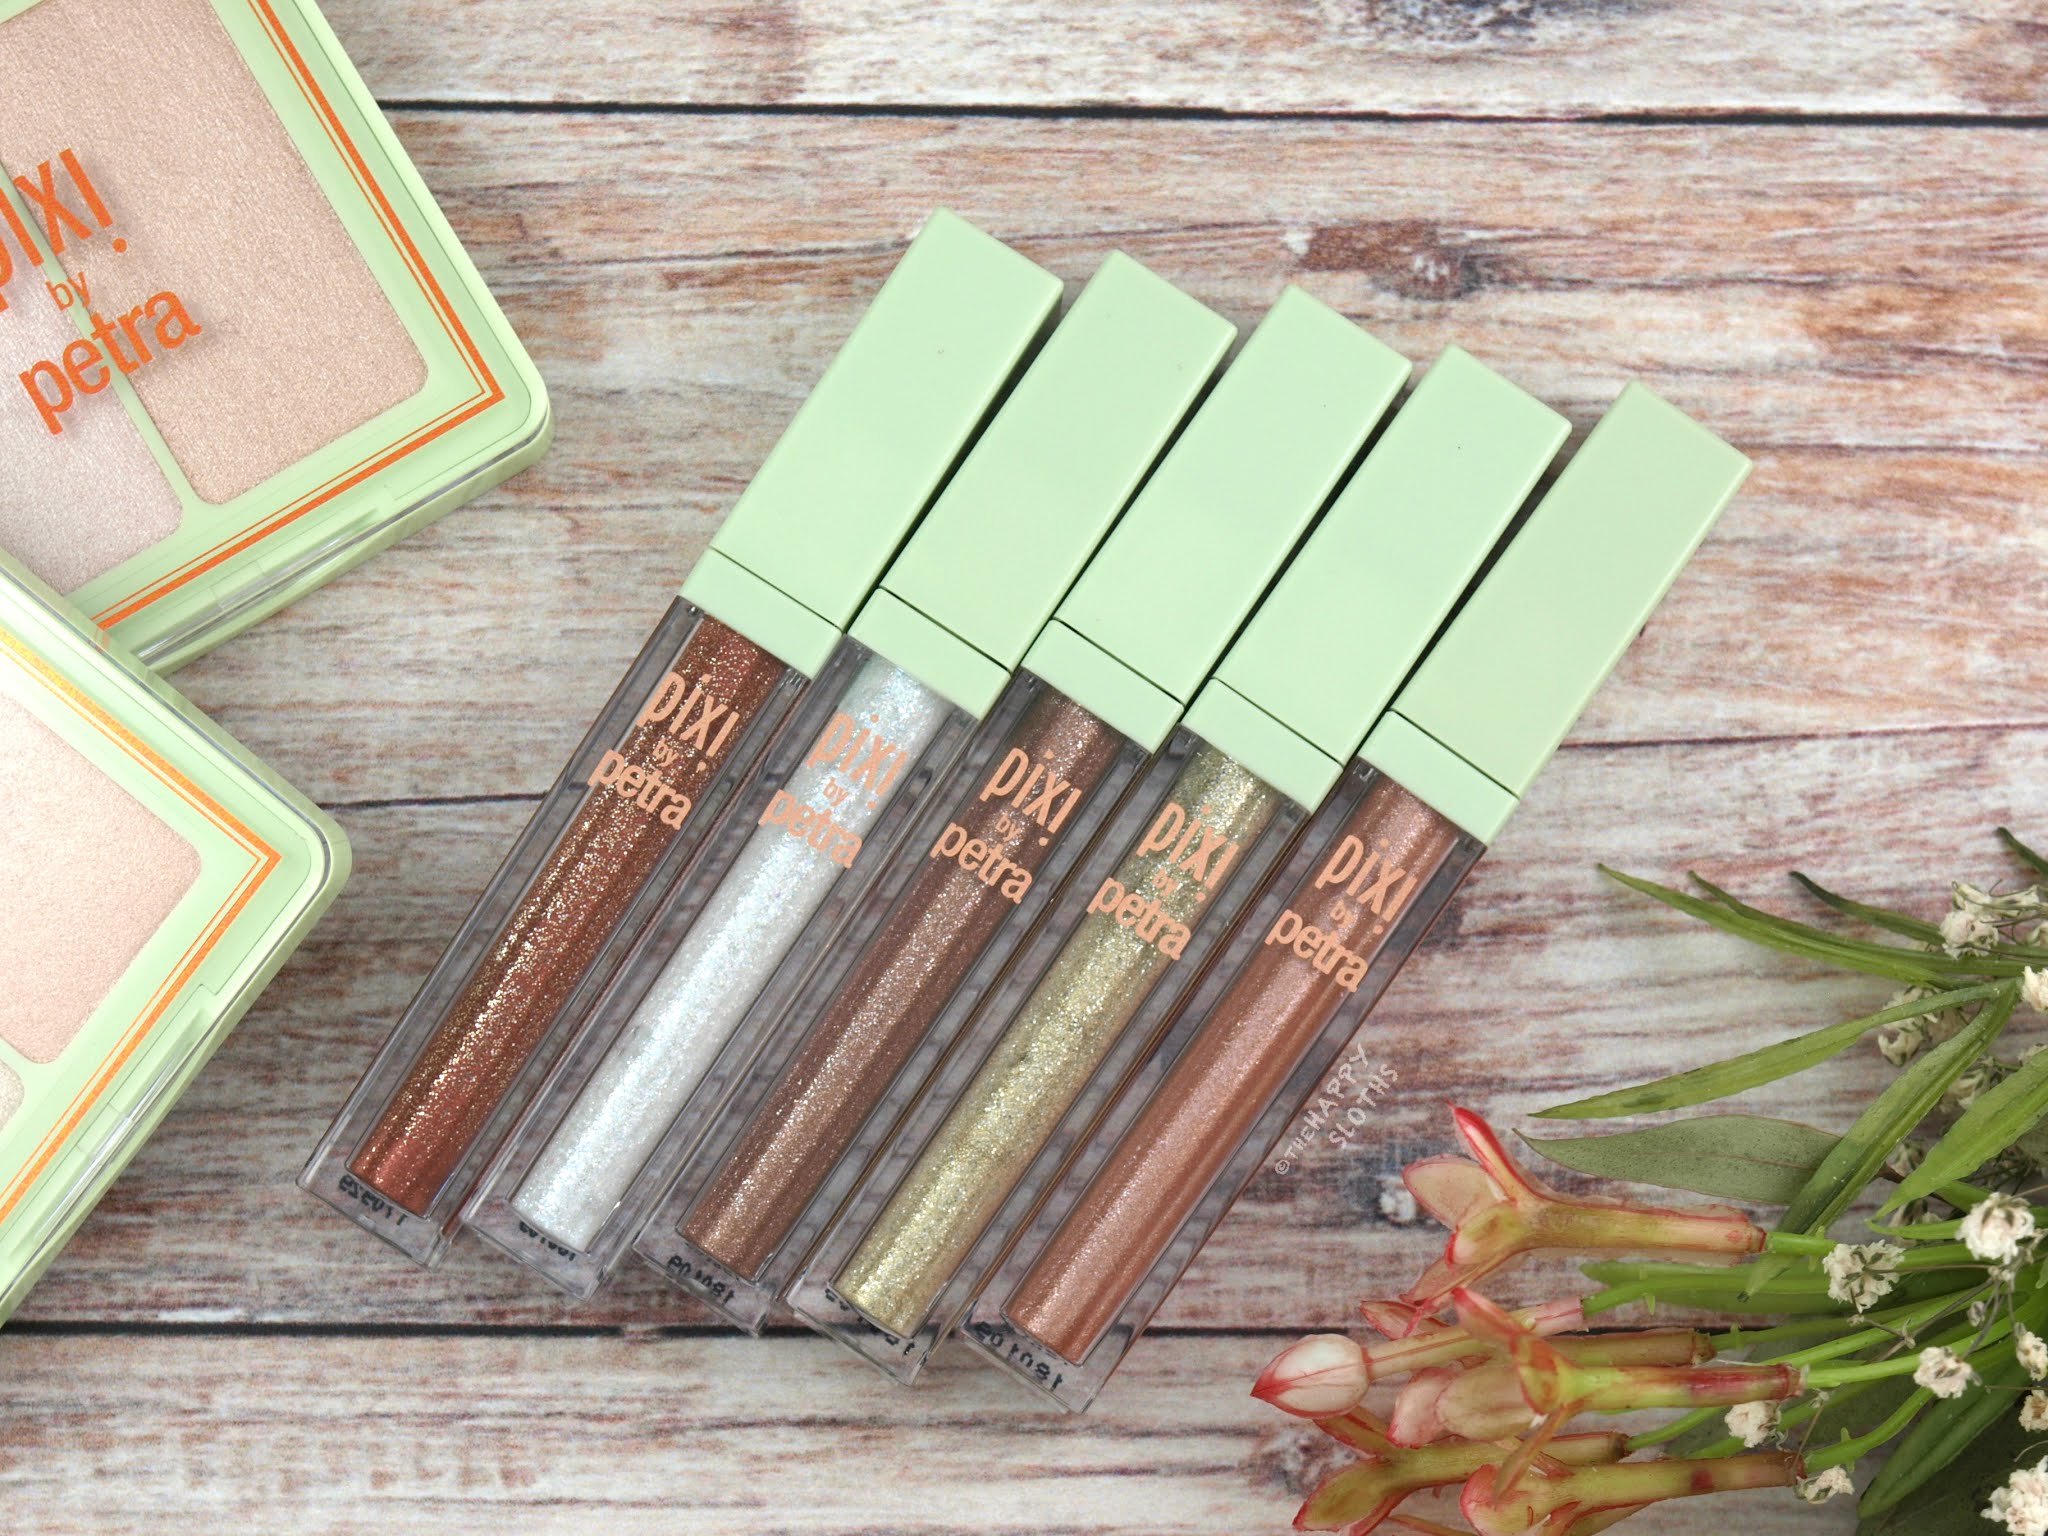 Pixi | Liquid Fairy Lights Eyeshadow: Review and Swatches